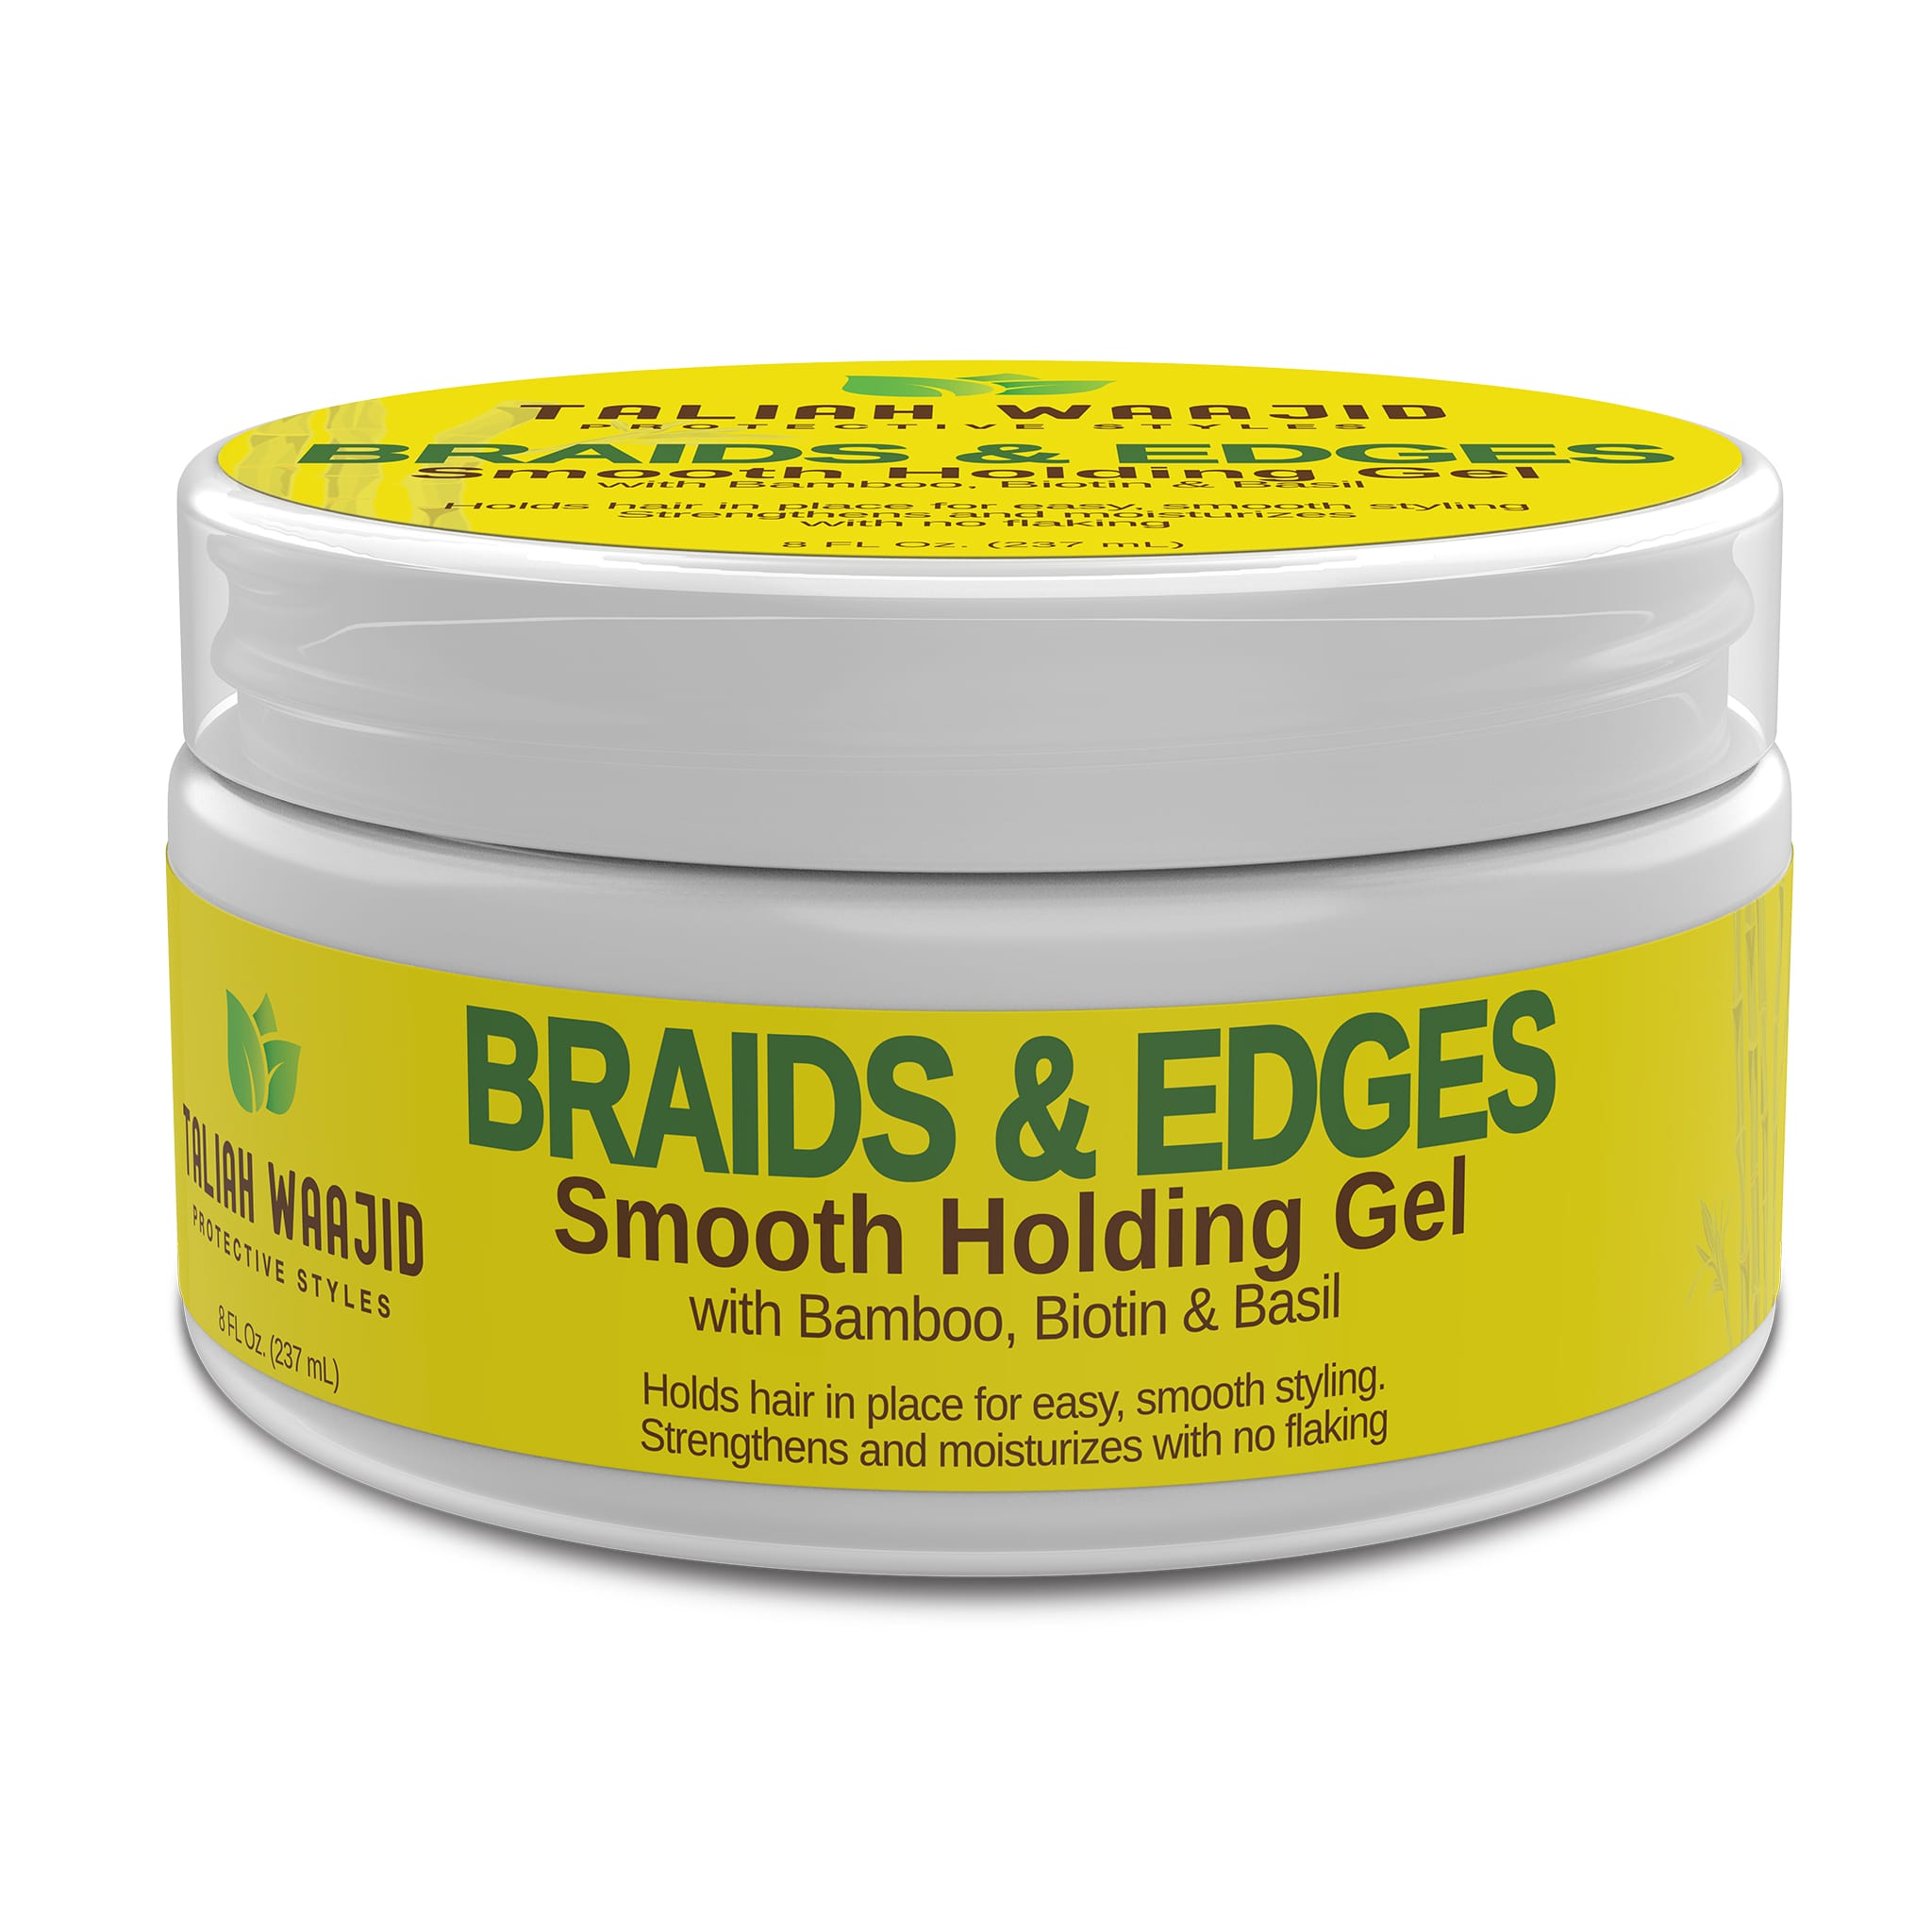 Braids & Edges Smooth Holding Gel, Protective Styles